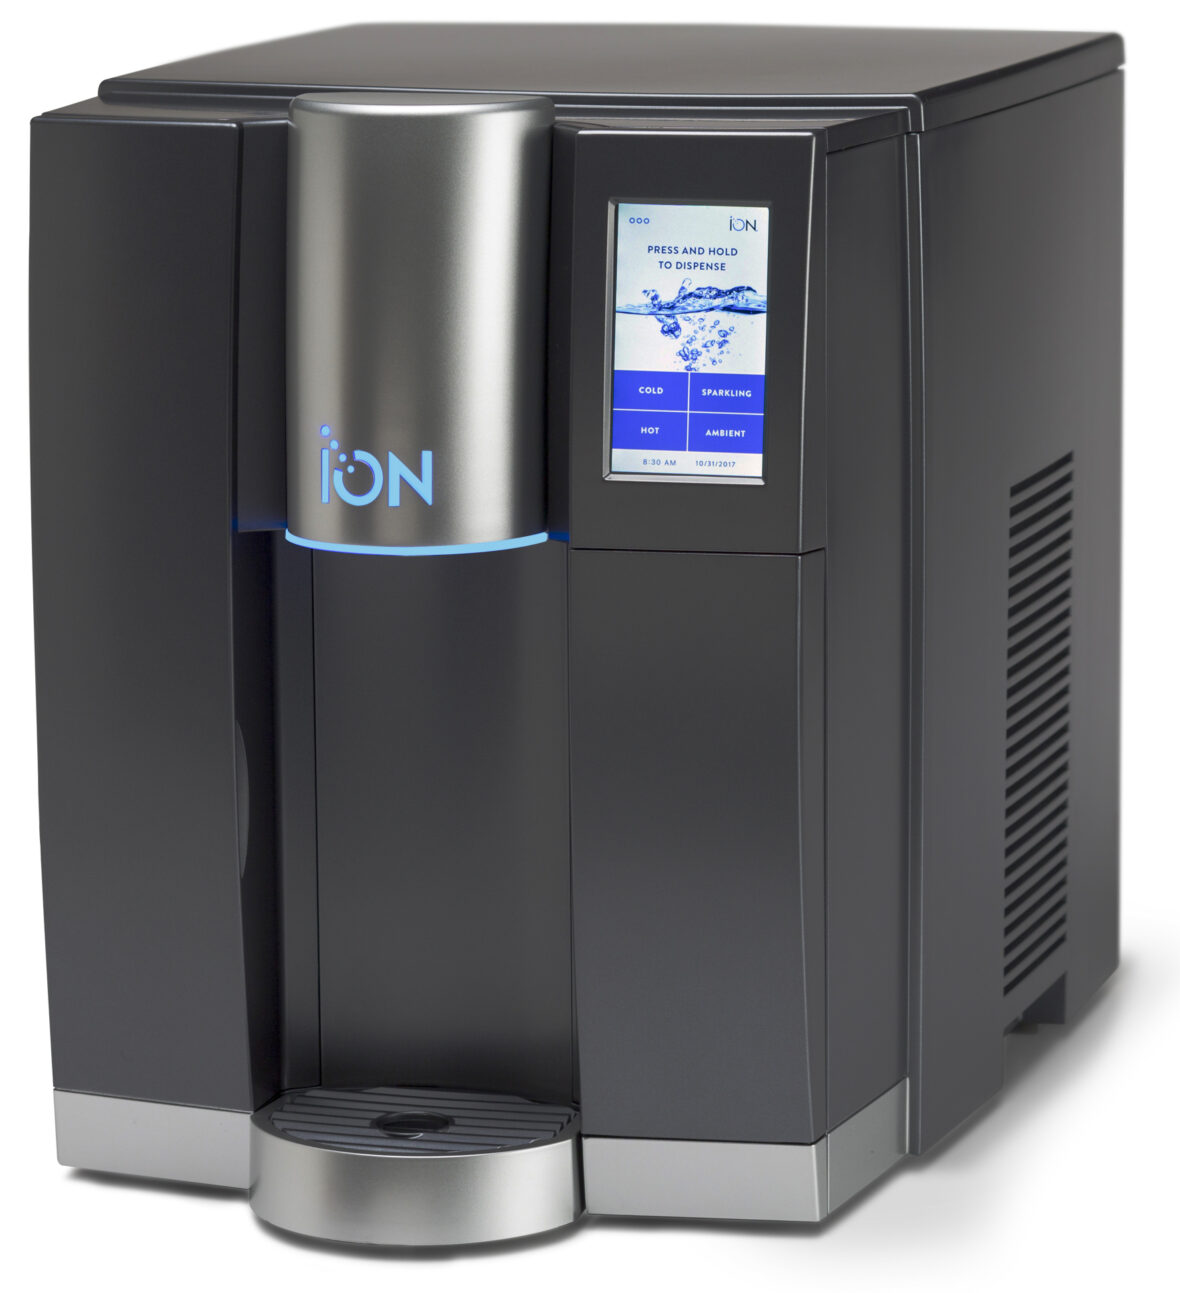 ION tap water cooler